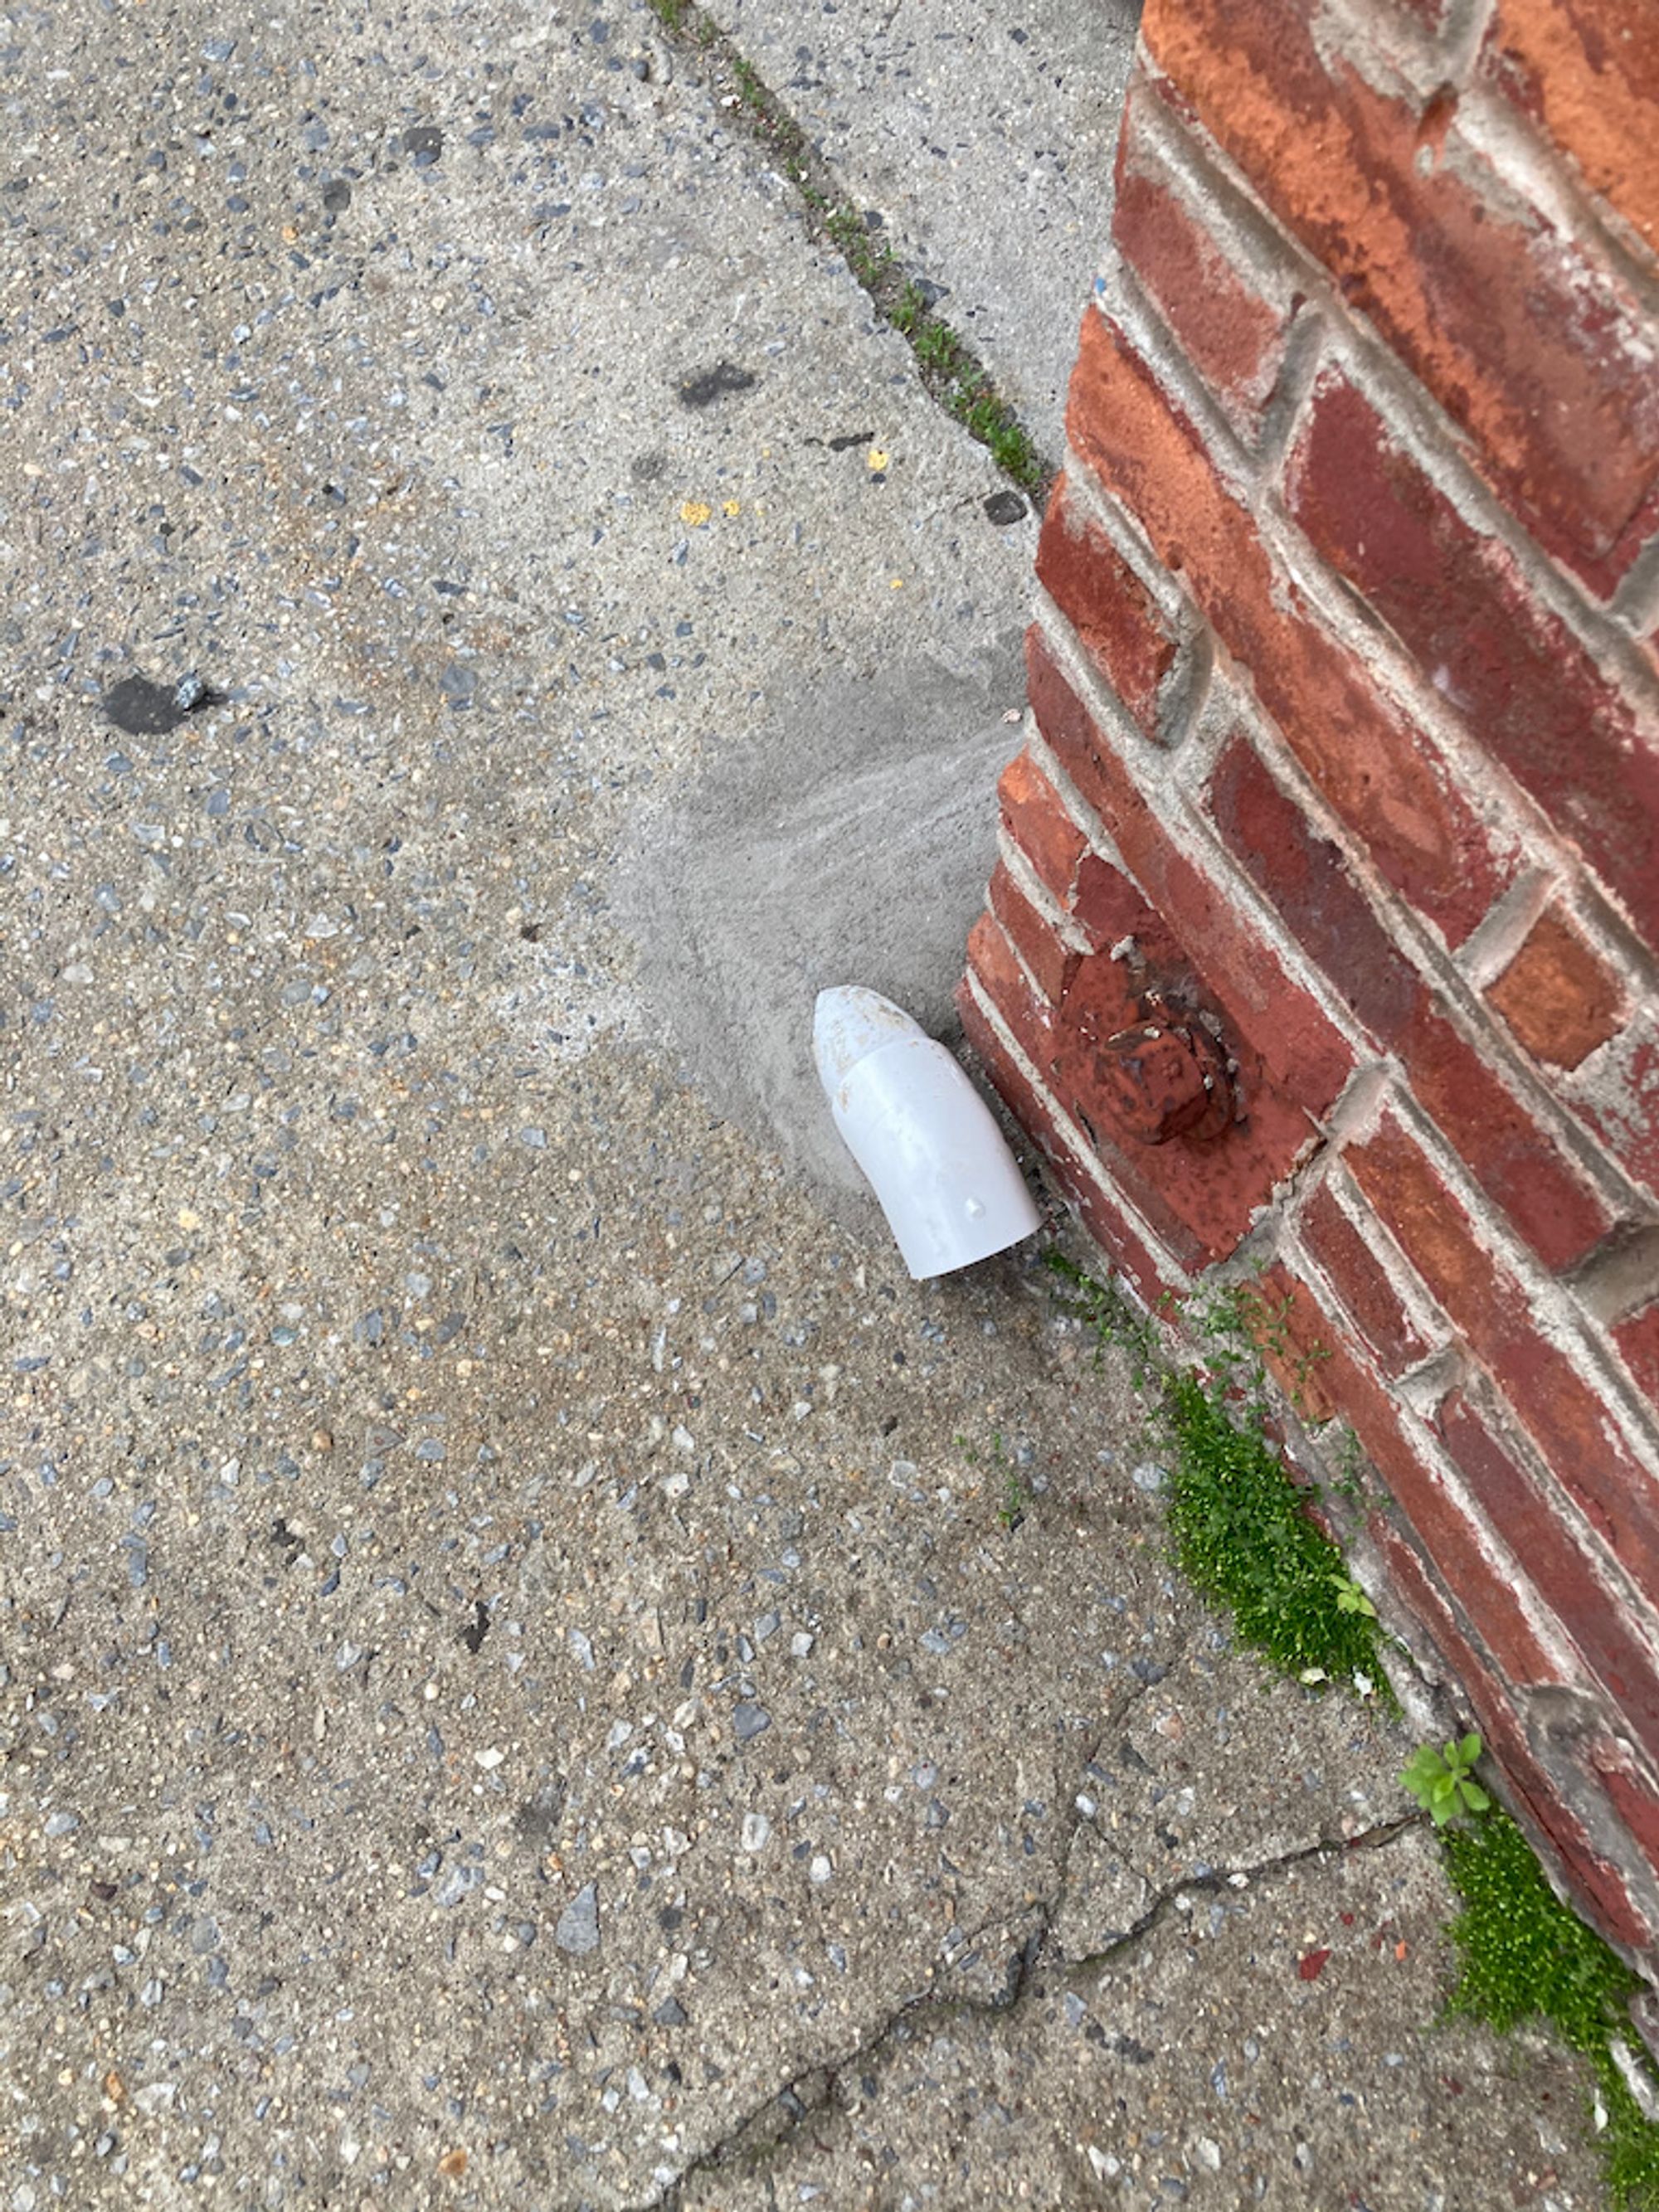 PVC pipe coming out of the sidewalk